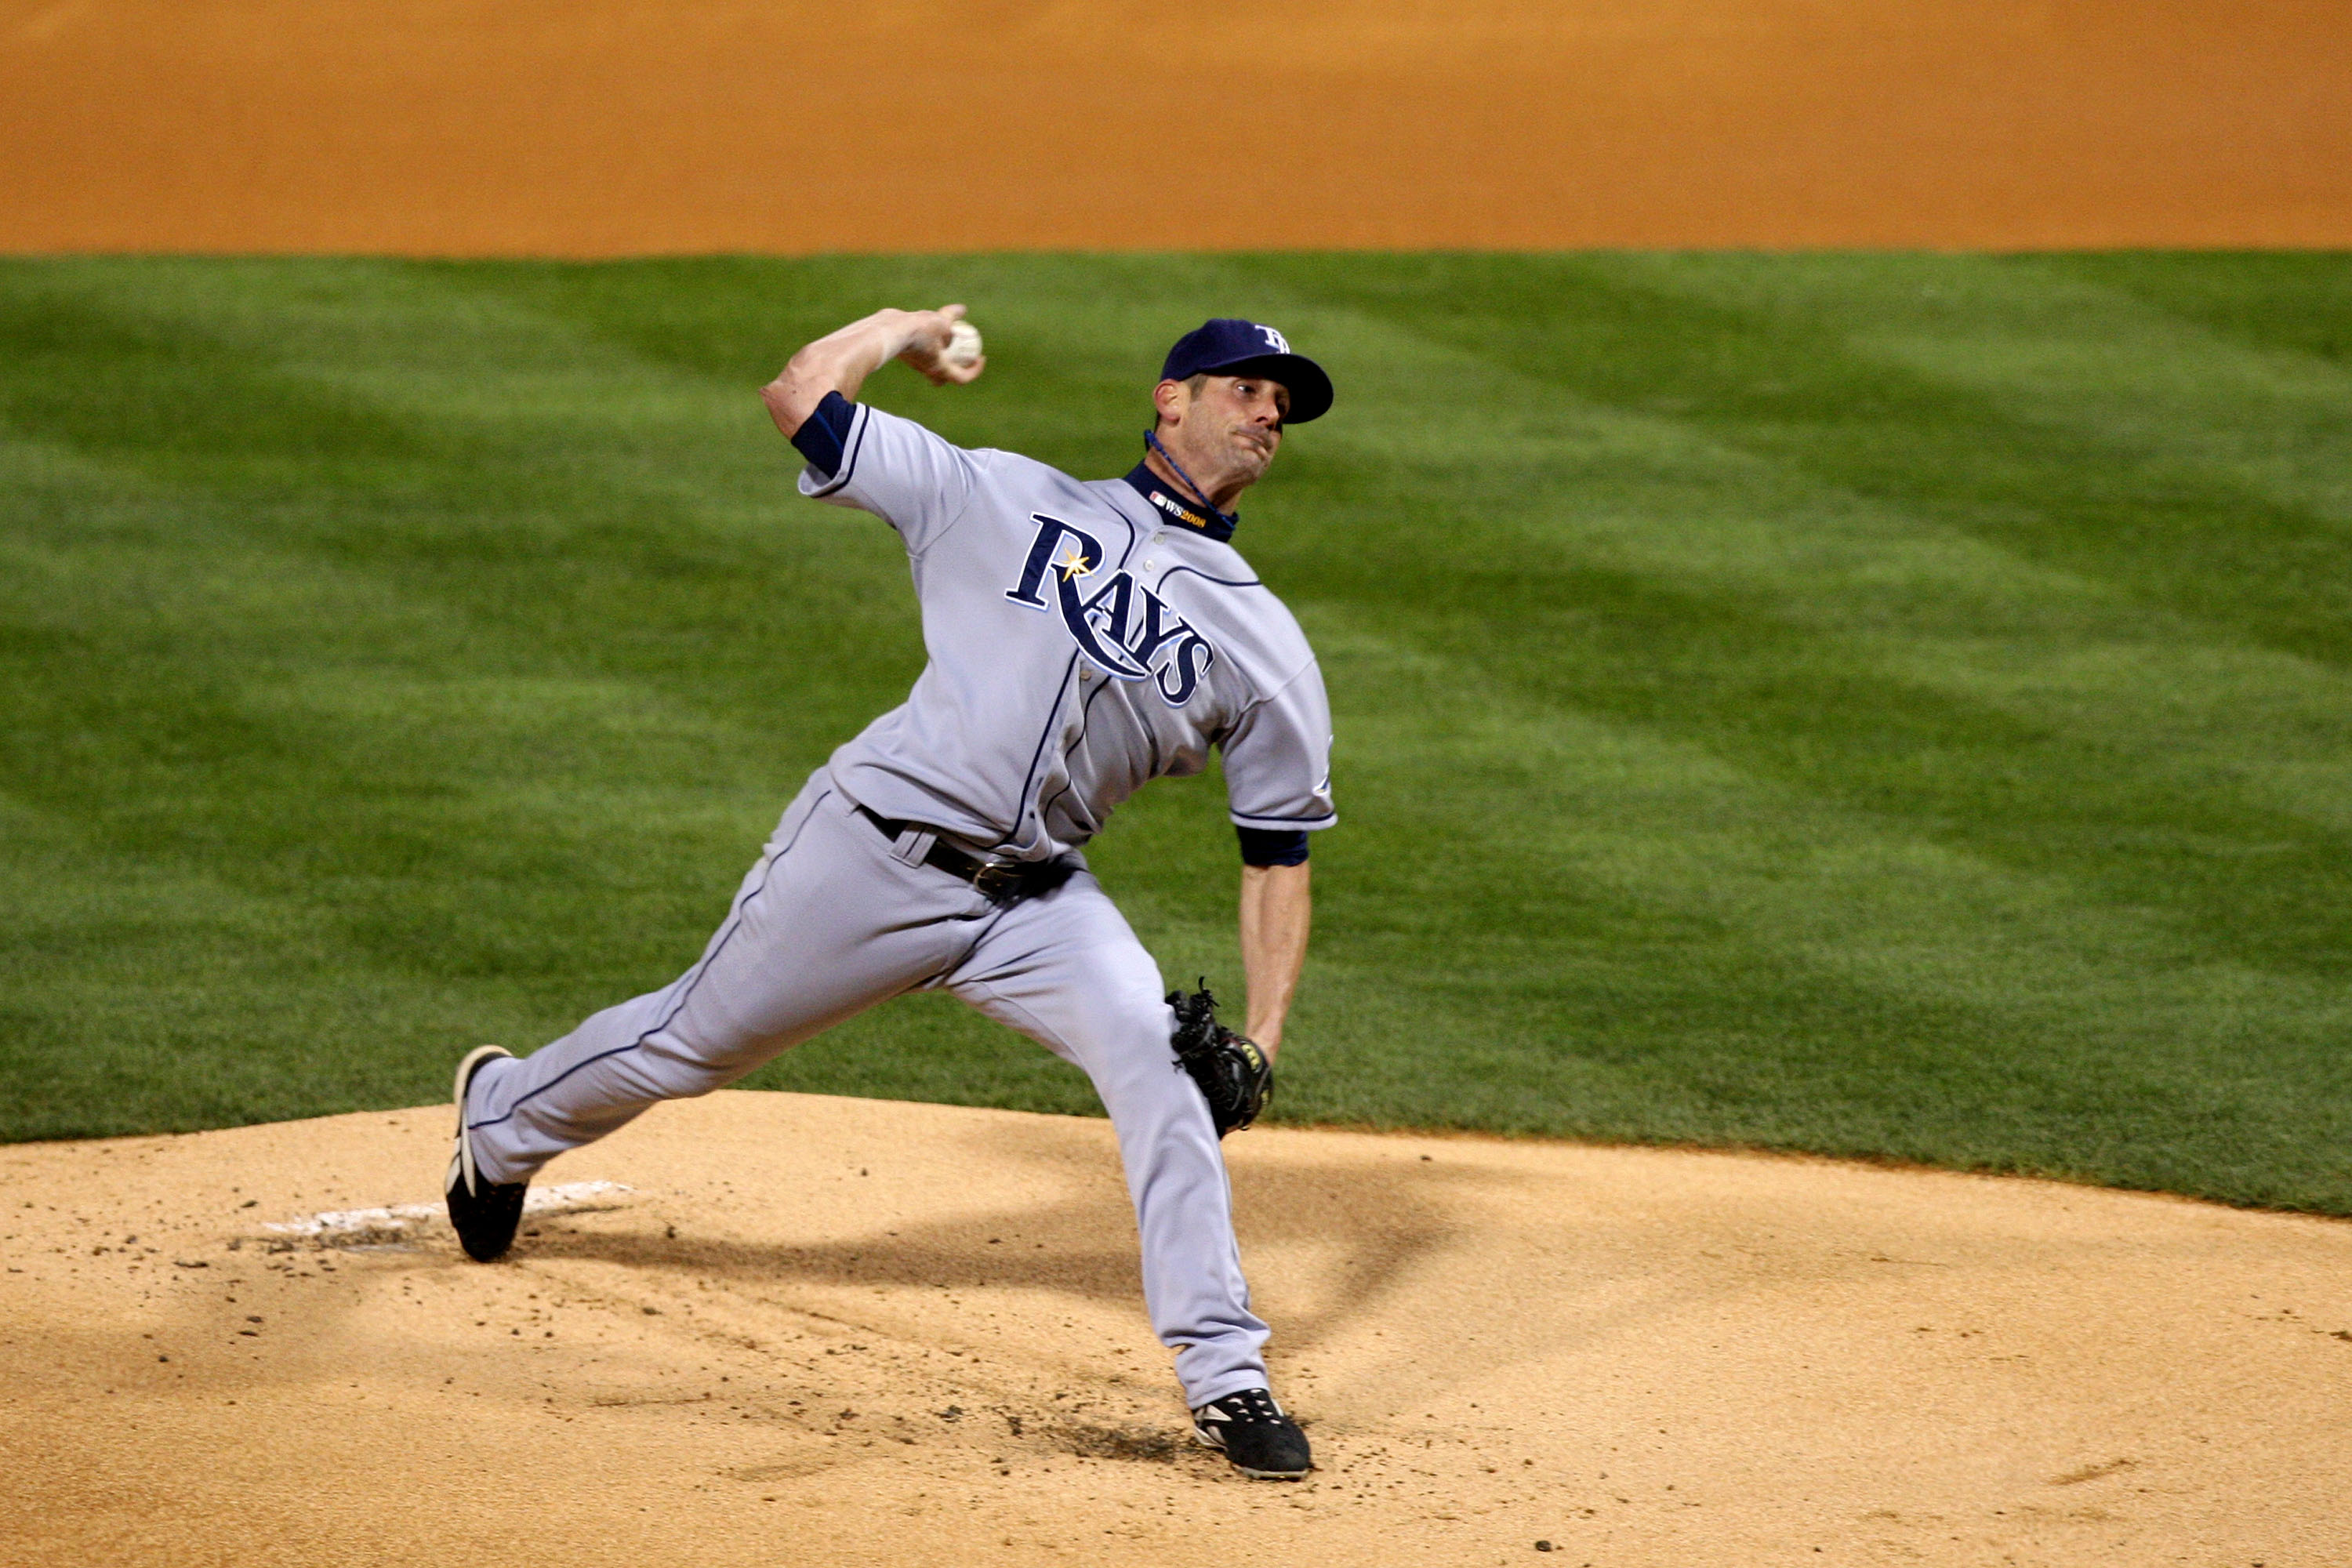 Andy Pettitte and MLB's 25 Biggest Remaining Offseason Questions